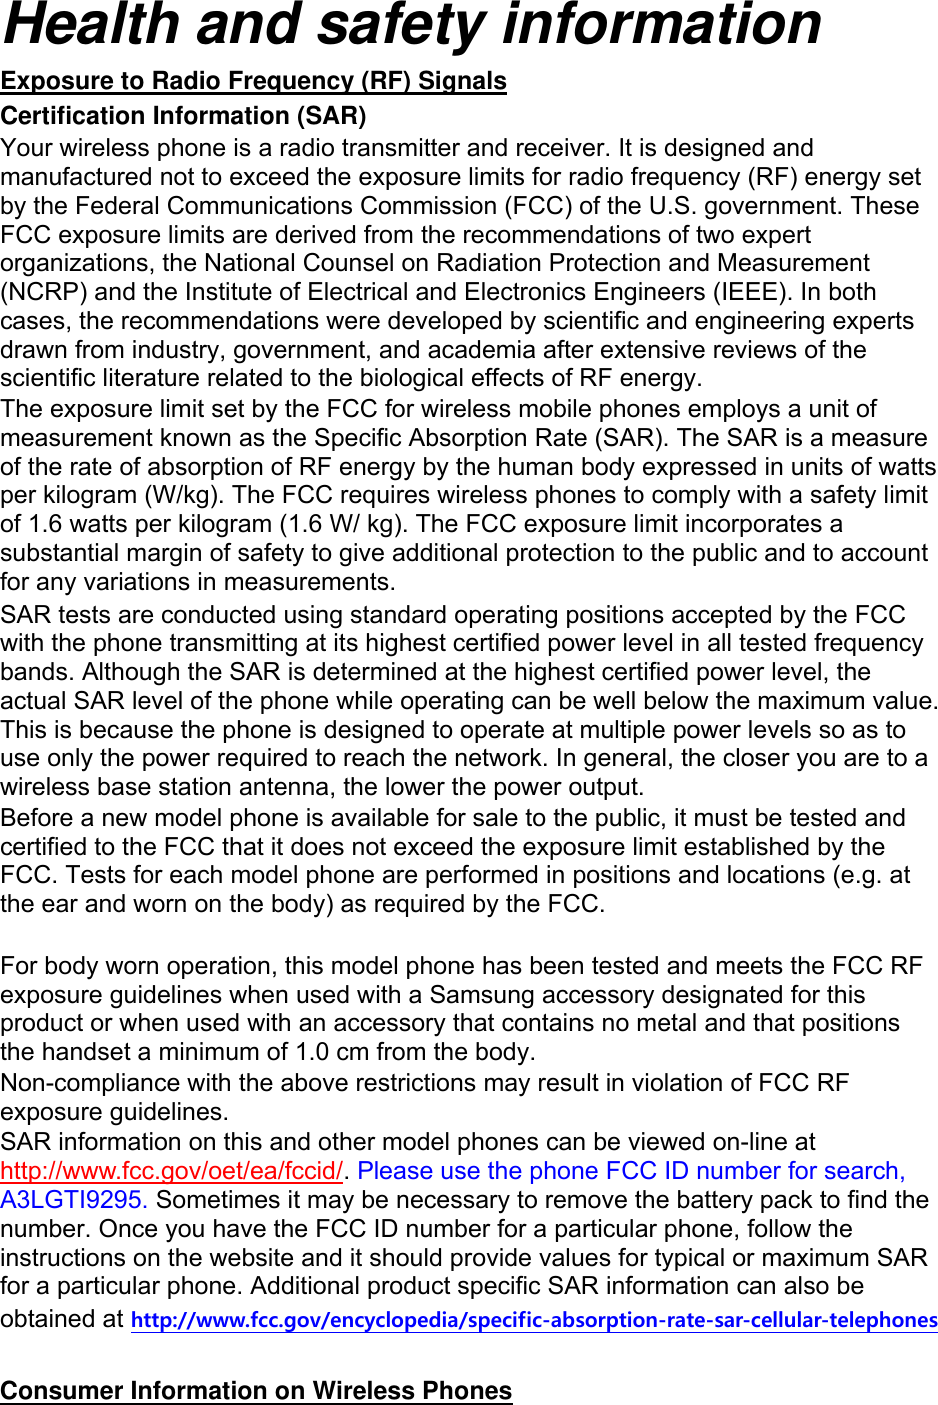 Health and safety information Exposure to Radio Frequency (RF) Signals Certification Information (SAR) Your wireless phone is a radio transmitter and receiver. It is designed and manufactured not to exceed the exposure limits for radio frequency (RF) energy set by the Federal Communications Commission (FCC) of the U.S. government. These FCC exposure limits are derived from the recommendations of two expert organizations, the National Counsel on Radiation Protection and Measurement (NCRP) and the Institute of Electrical and Electronics Engineers (IEEE). In both cases, the recommendations were developed by scientific and engineering experts drawn from industry, government, and academia after extensive reviews of the scientific literature related to the biological effects of RF energy. The exposure limit set by the FCC for wireless mobile phones employs a unit of measurement known as the Specific Absorption Rate (SAR). The SAR is a measure of the rate of absorption of RF energy by the human body expressed in units of watts per kilogram (W/kg). The FCC requires wireless phones to comply with a safety limit of 1.6 watts per kilogram (1.6 W/ kg). The FCC exposure limit incorporates a substantial margin of safety to give additional protection to the public and to account for any variations in measurements. SAR tests are conducted using standard operating positions accepted by the FCC with the phone transmitting at its highest certified power level in all tested frequency bands. Although the SAR is determined at the highest certified power level, the actual SAR level of the phone while operating can be well below the maximum value. This is because the phone is designed to operate at multiple power levels so as to use only the power required to reach the network. In general, the closer you are to a wireless base station antenna, the lower the power output. Before a new model phone is available for sale to the public, it must be tested and certified to the FCC that it does not exceed the exposure limit established by the FCC. Tests for each model phone are performed in positions and locations (e.g. at the ear and worn on the body) as required by the FCC.      For body worn operation, this model phone has been tested and meets the FCC RF exposure guidelines when used with a Samsung accessory designated for this product or when used with an accessory that contains no metal and that positions the handset a minimum of 1.0 cm from the body.   Non-compliance with the above restrictions may result in violation of FCC RF exposure guidelines. SAR information on this and other model phones can be viewed on-line at http://www.fcc.gov/oet/ea/fccid/. Please use the phone FCC ID number for search, A3LGTI9295. Sometimes it may be necessary to remove the battery pack to find the number. Once you have the FCC ID number for a particular phone, follow the instructions on the website and it should provide values for typical or maximum SAR for a particular phone. Additional product specific SAR information can also be obtained at http://www.fcc.gov/encyclopedia/specific-absorption-rate-sar-cellular-telephones  Consumer Information on Wireless Phones 